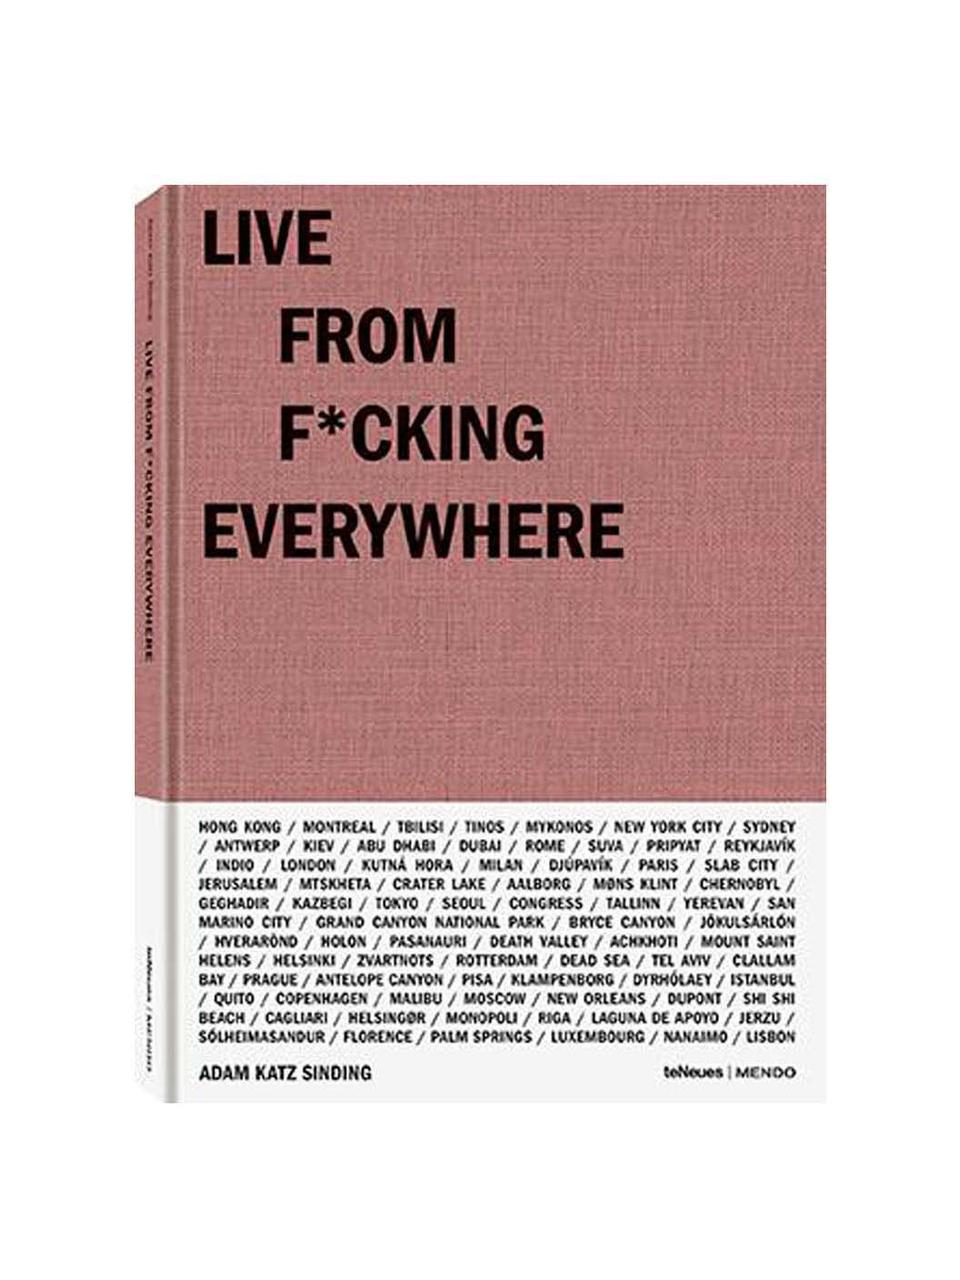 Livre photo Live from F*cking Everywhere, Papier, Livre photo Live from F*cking Everywhere, larg. 30 x long. 22 cm